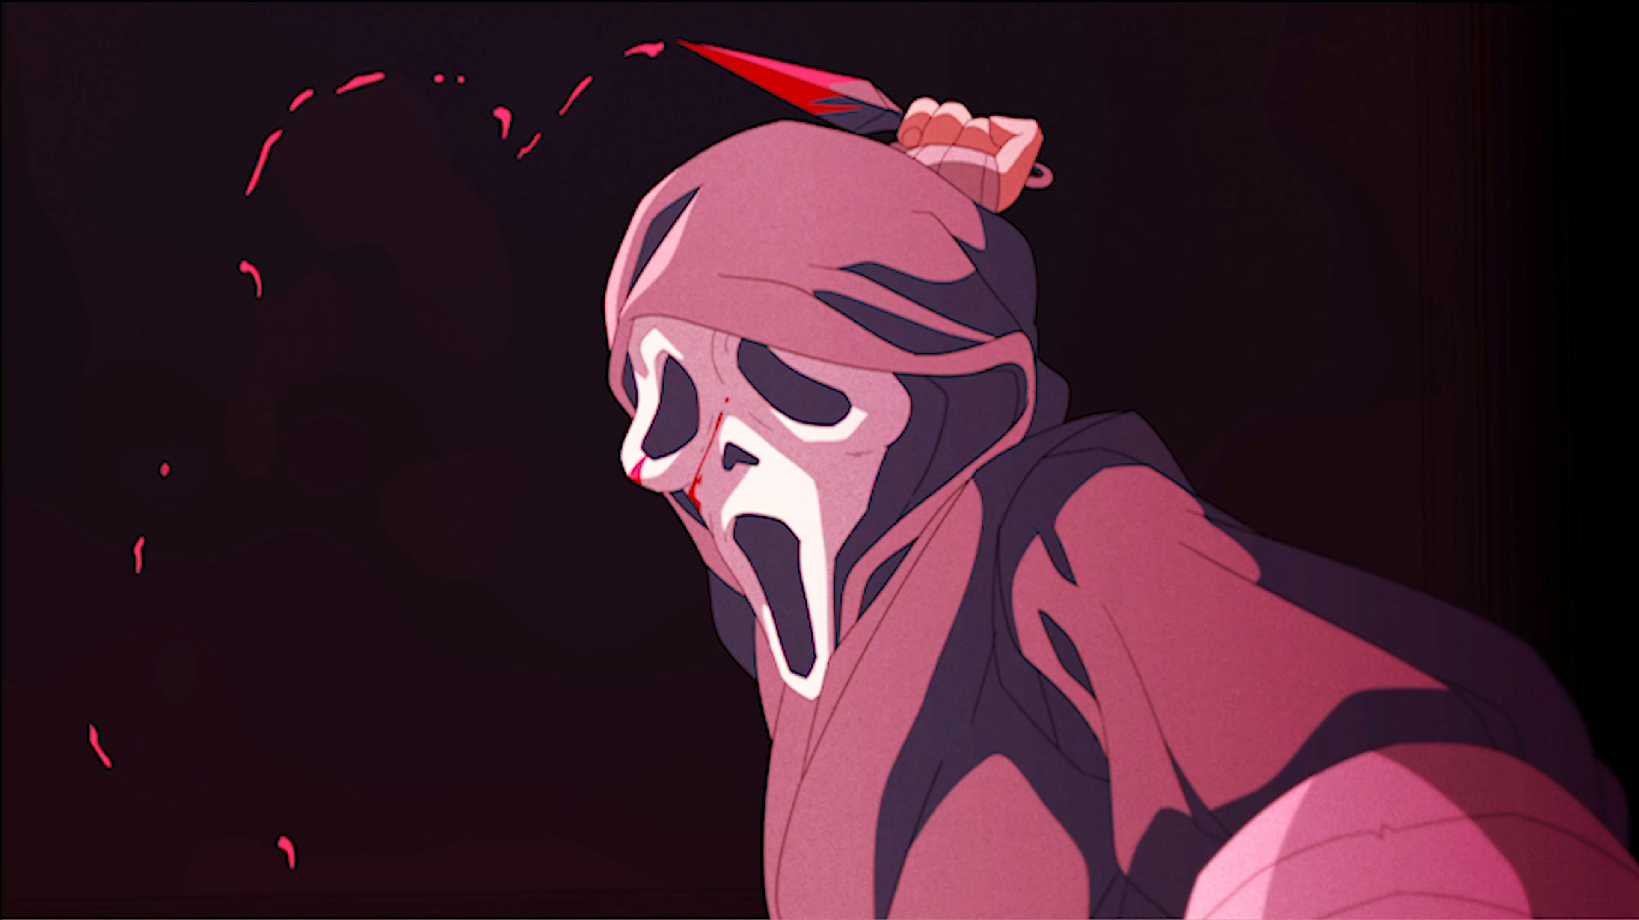 A pink ghostface from the animated series 